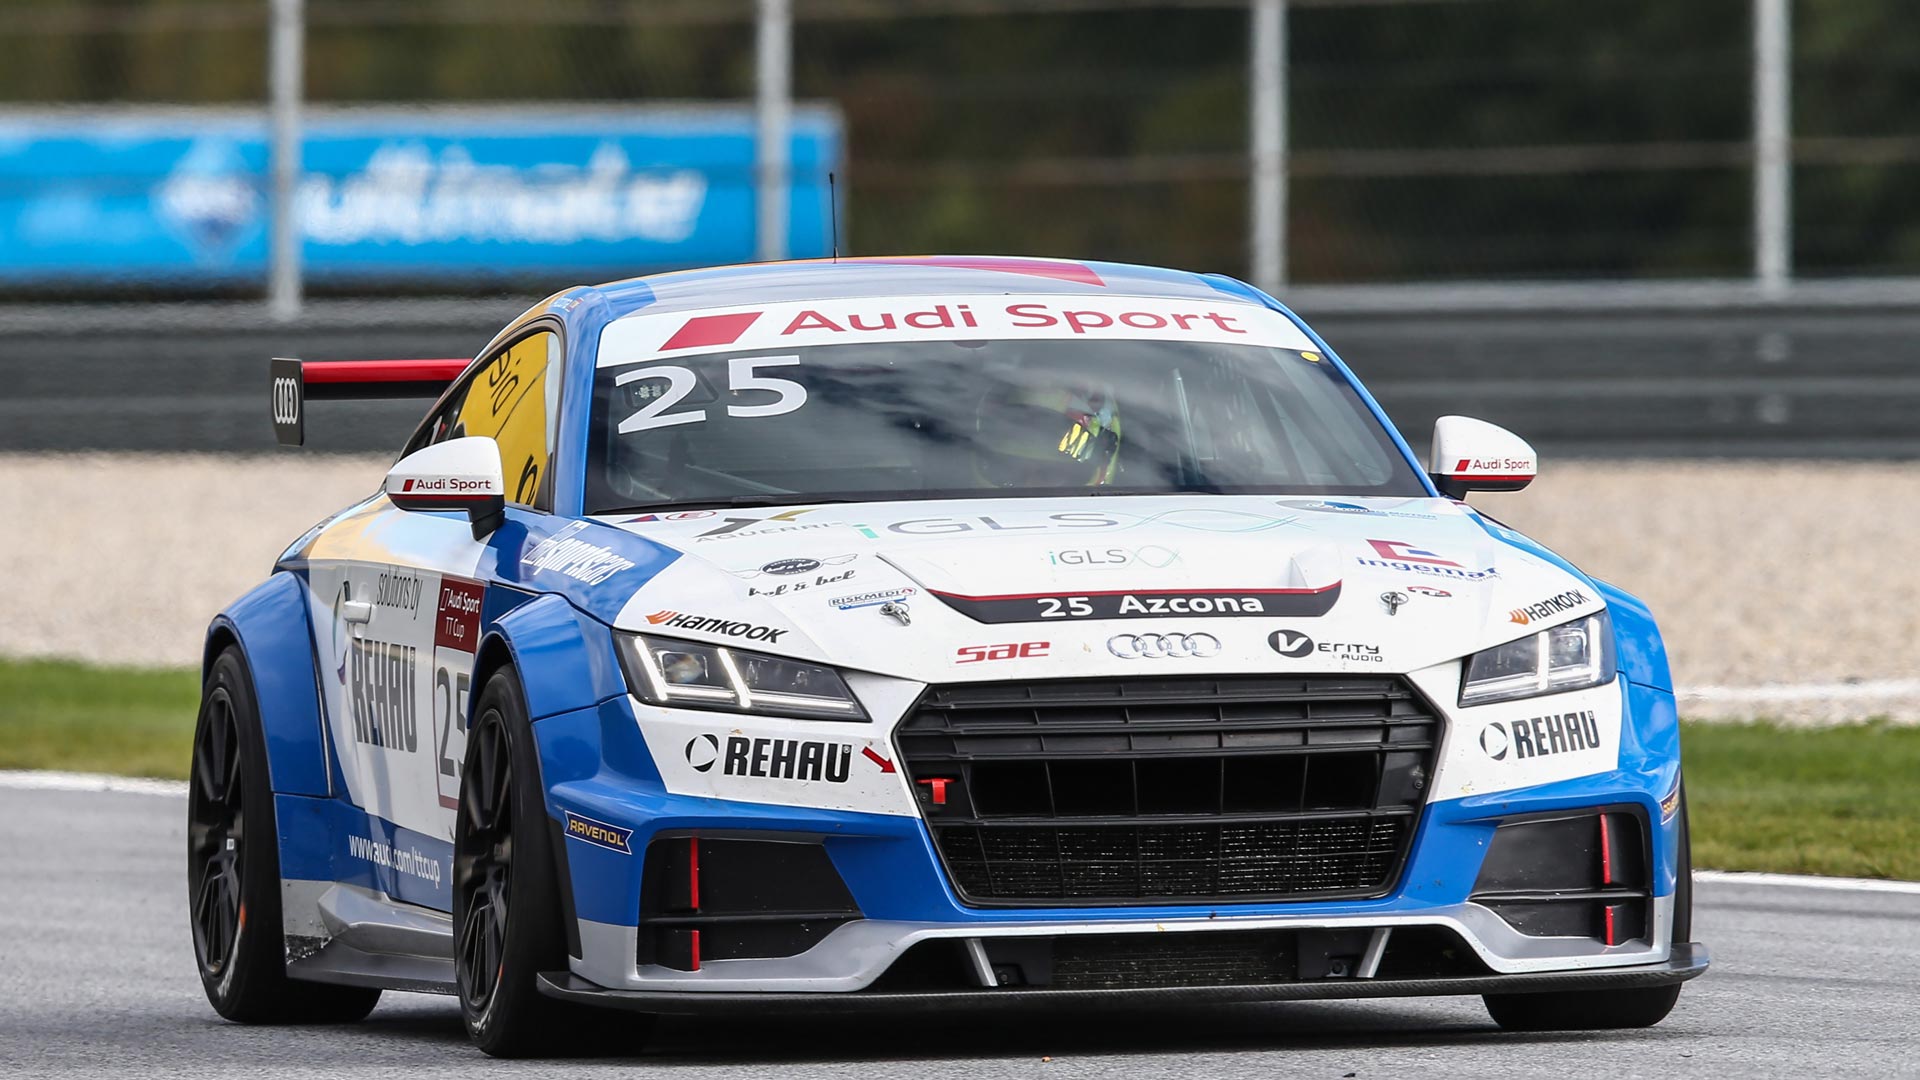 The sixth round of the Audi Sport TT Cup